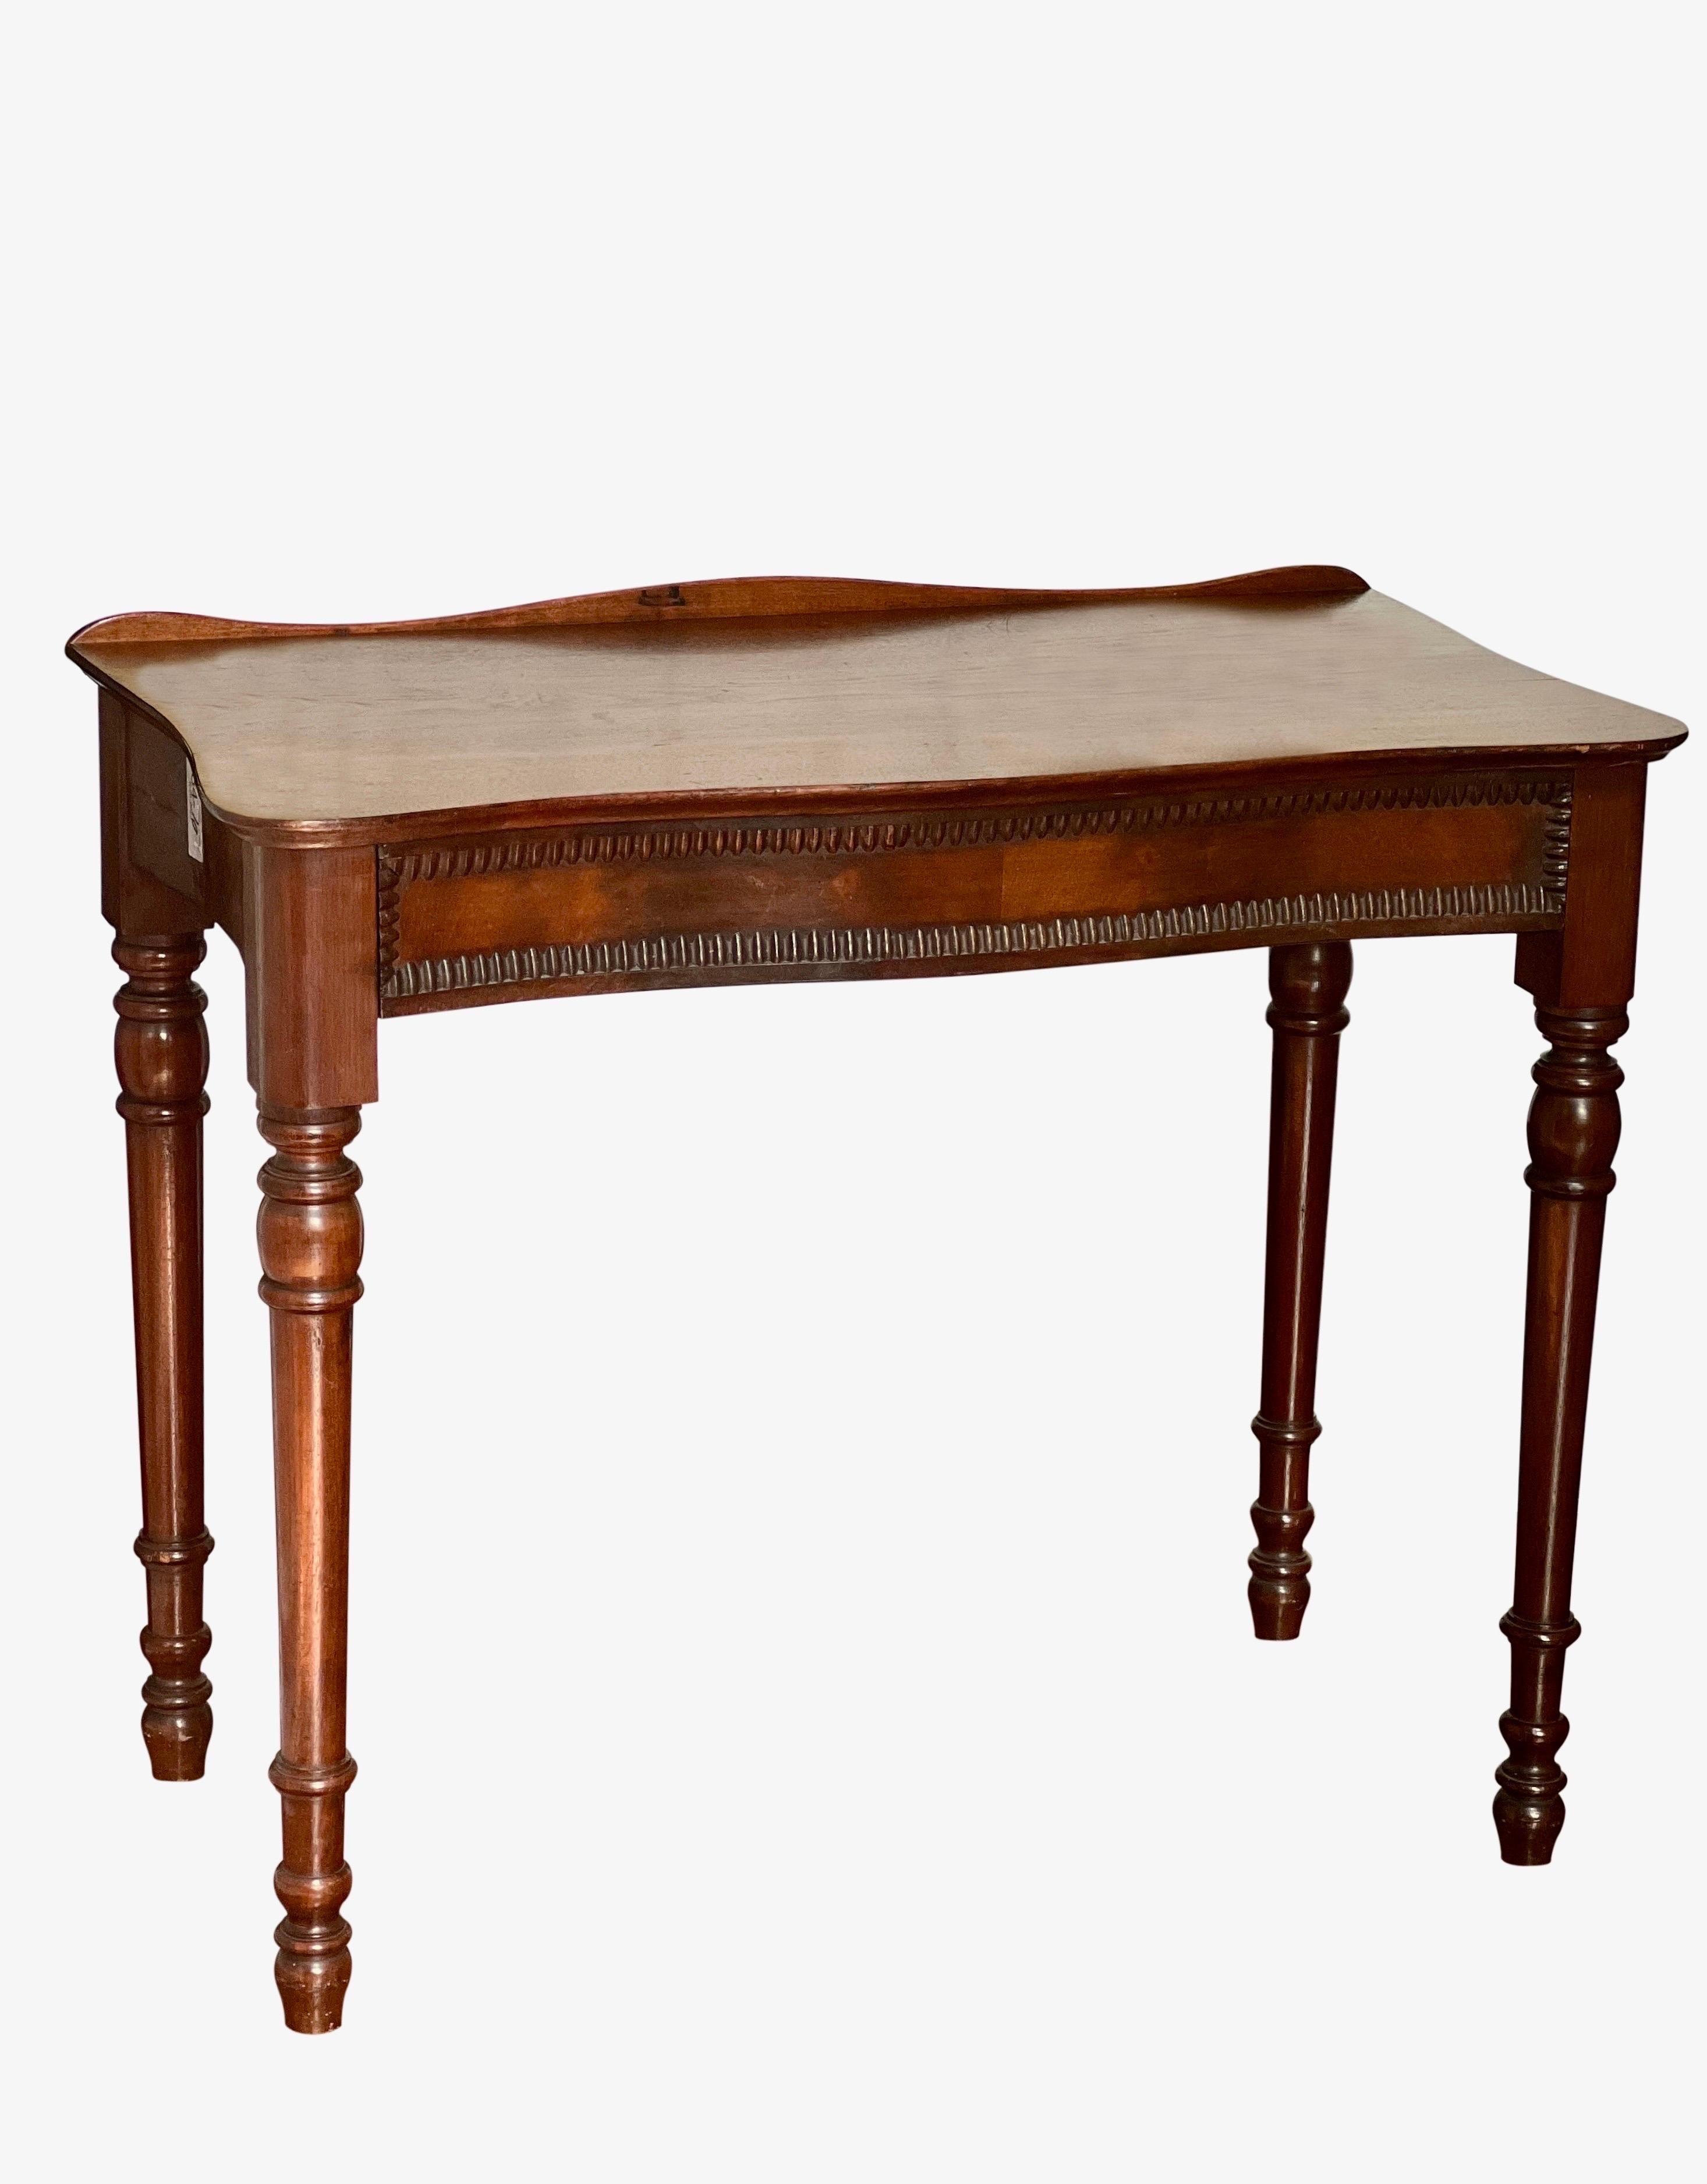 English petite mahogany and cherry wood writing desk, England, 1890's.

Exquisite serpentine desk with gracefully curved front and sides on turned spindle legs. The top has a unique feature as it is able to adjustably swivel to a 90 degree angle on